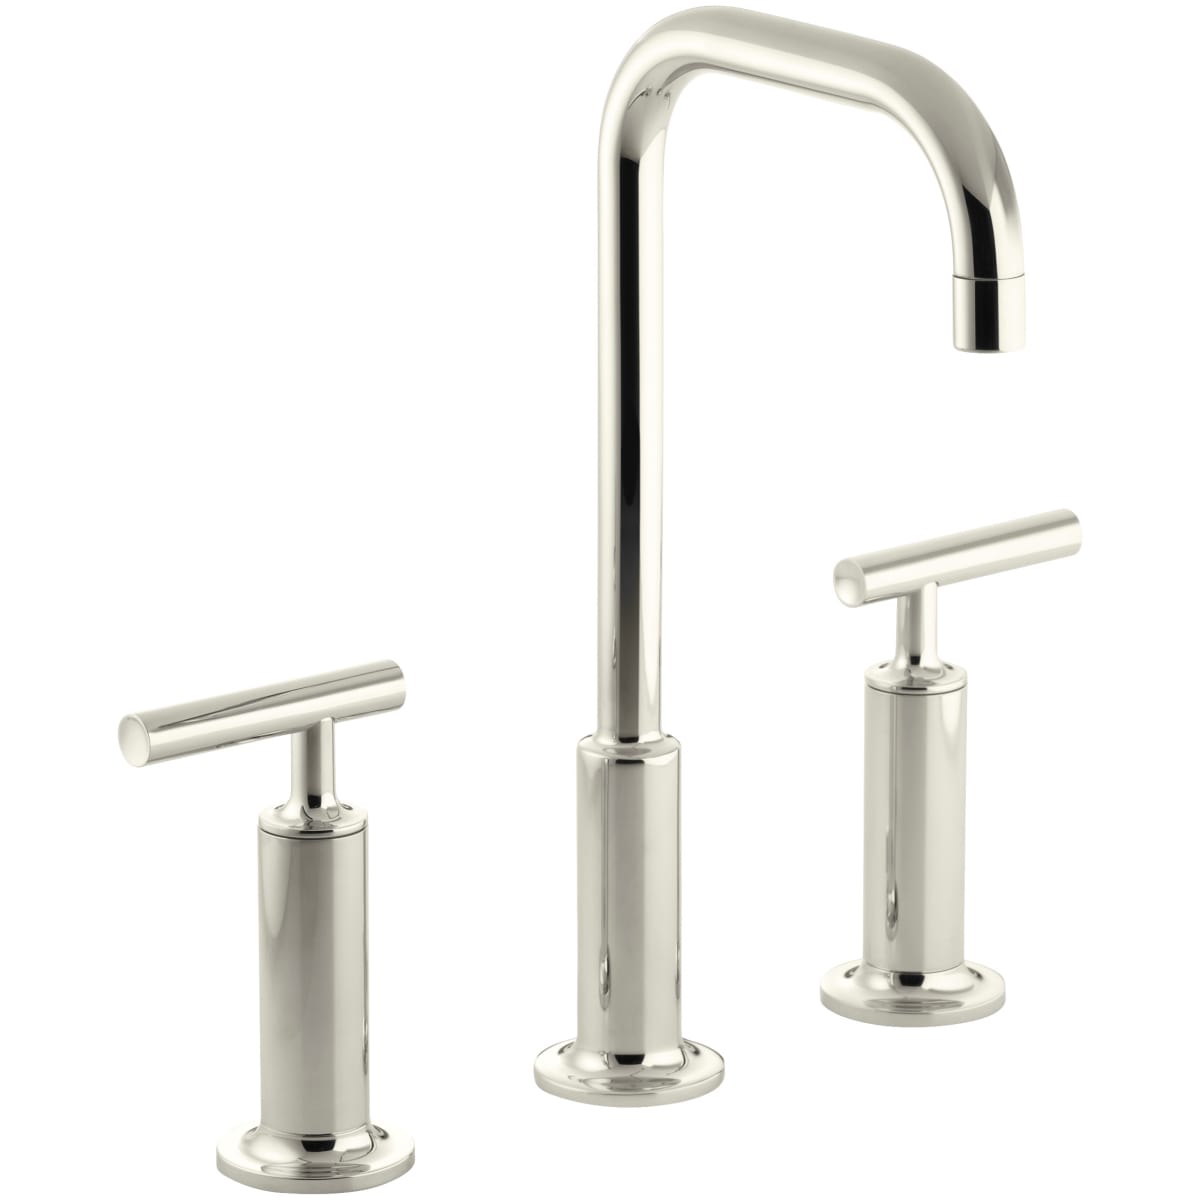 Kohler K-14408-4-SN Polished Nickel Purist 1.2 GPM Widespread Bathroom  Faucet with Pop-Up Drain Assembly